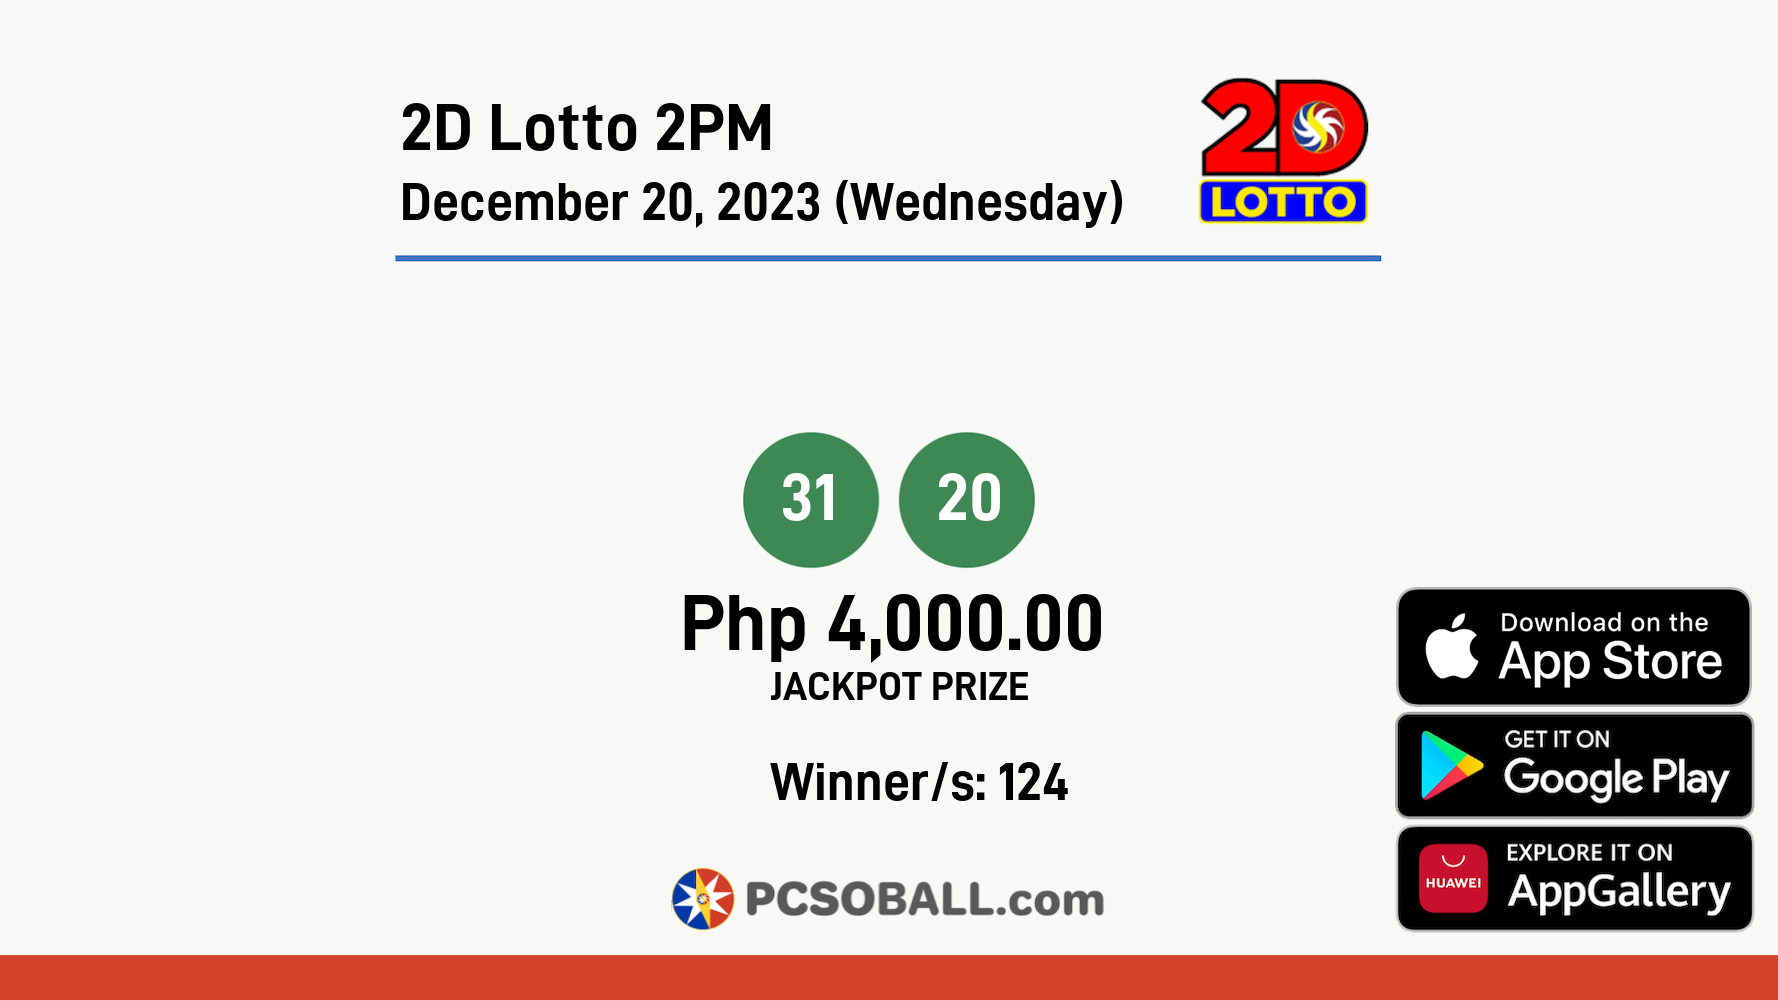 2D Lotto 2PM December 20, 2023 (Wednesday) Result